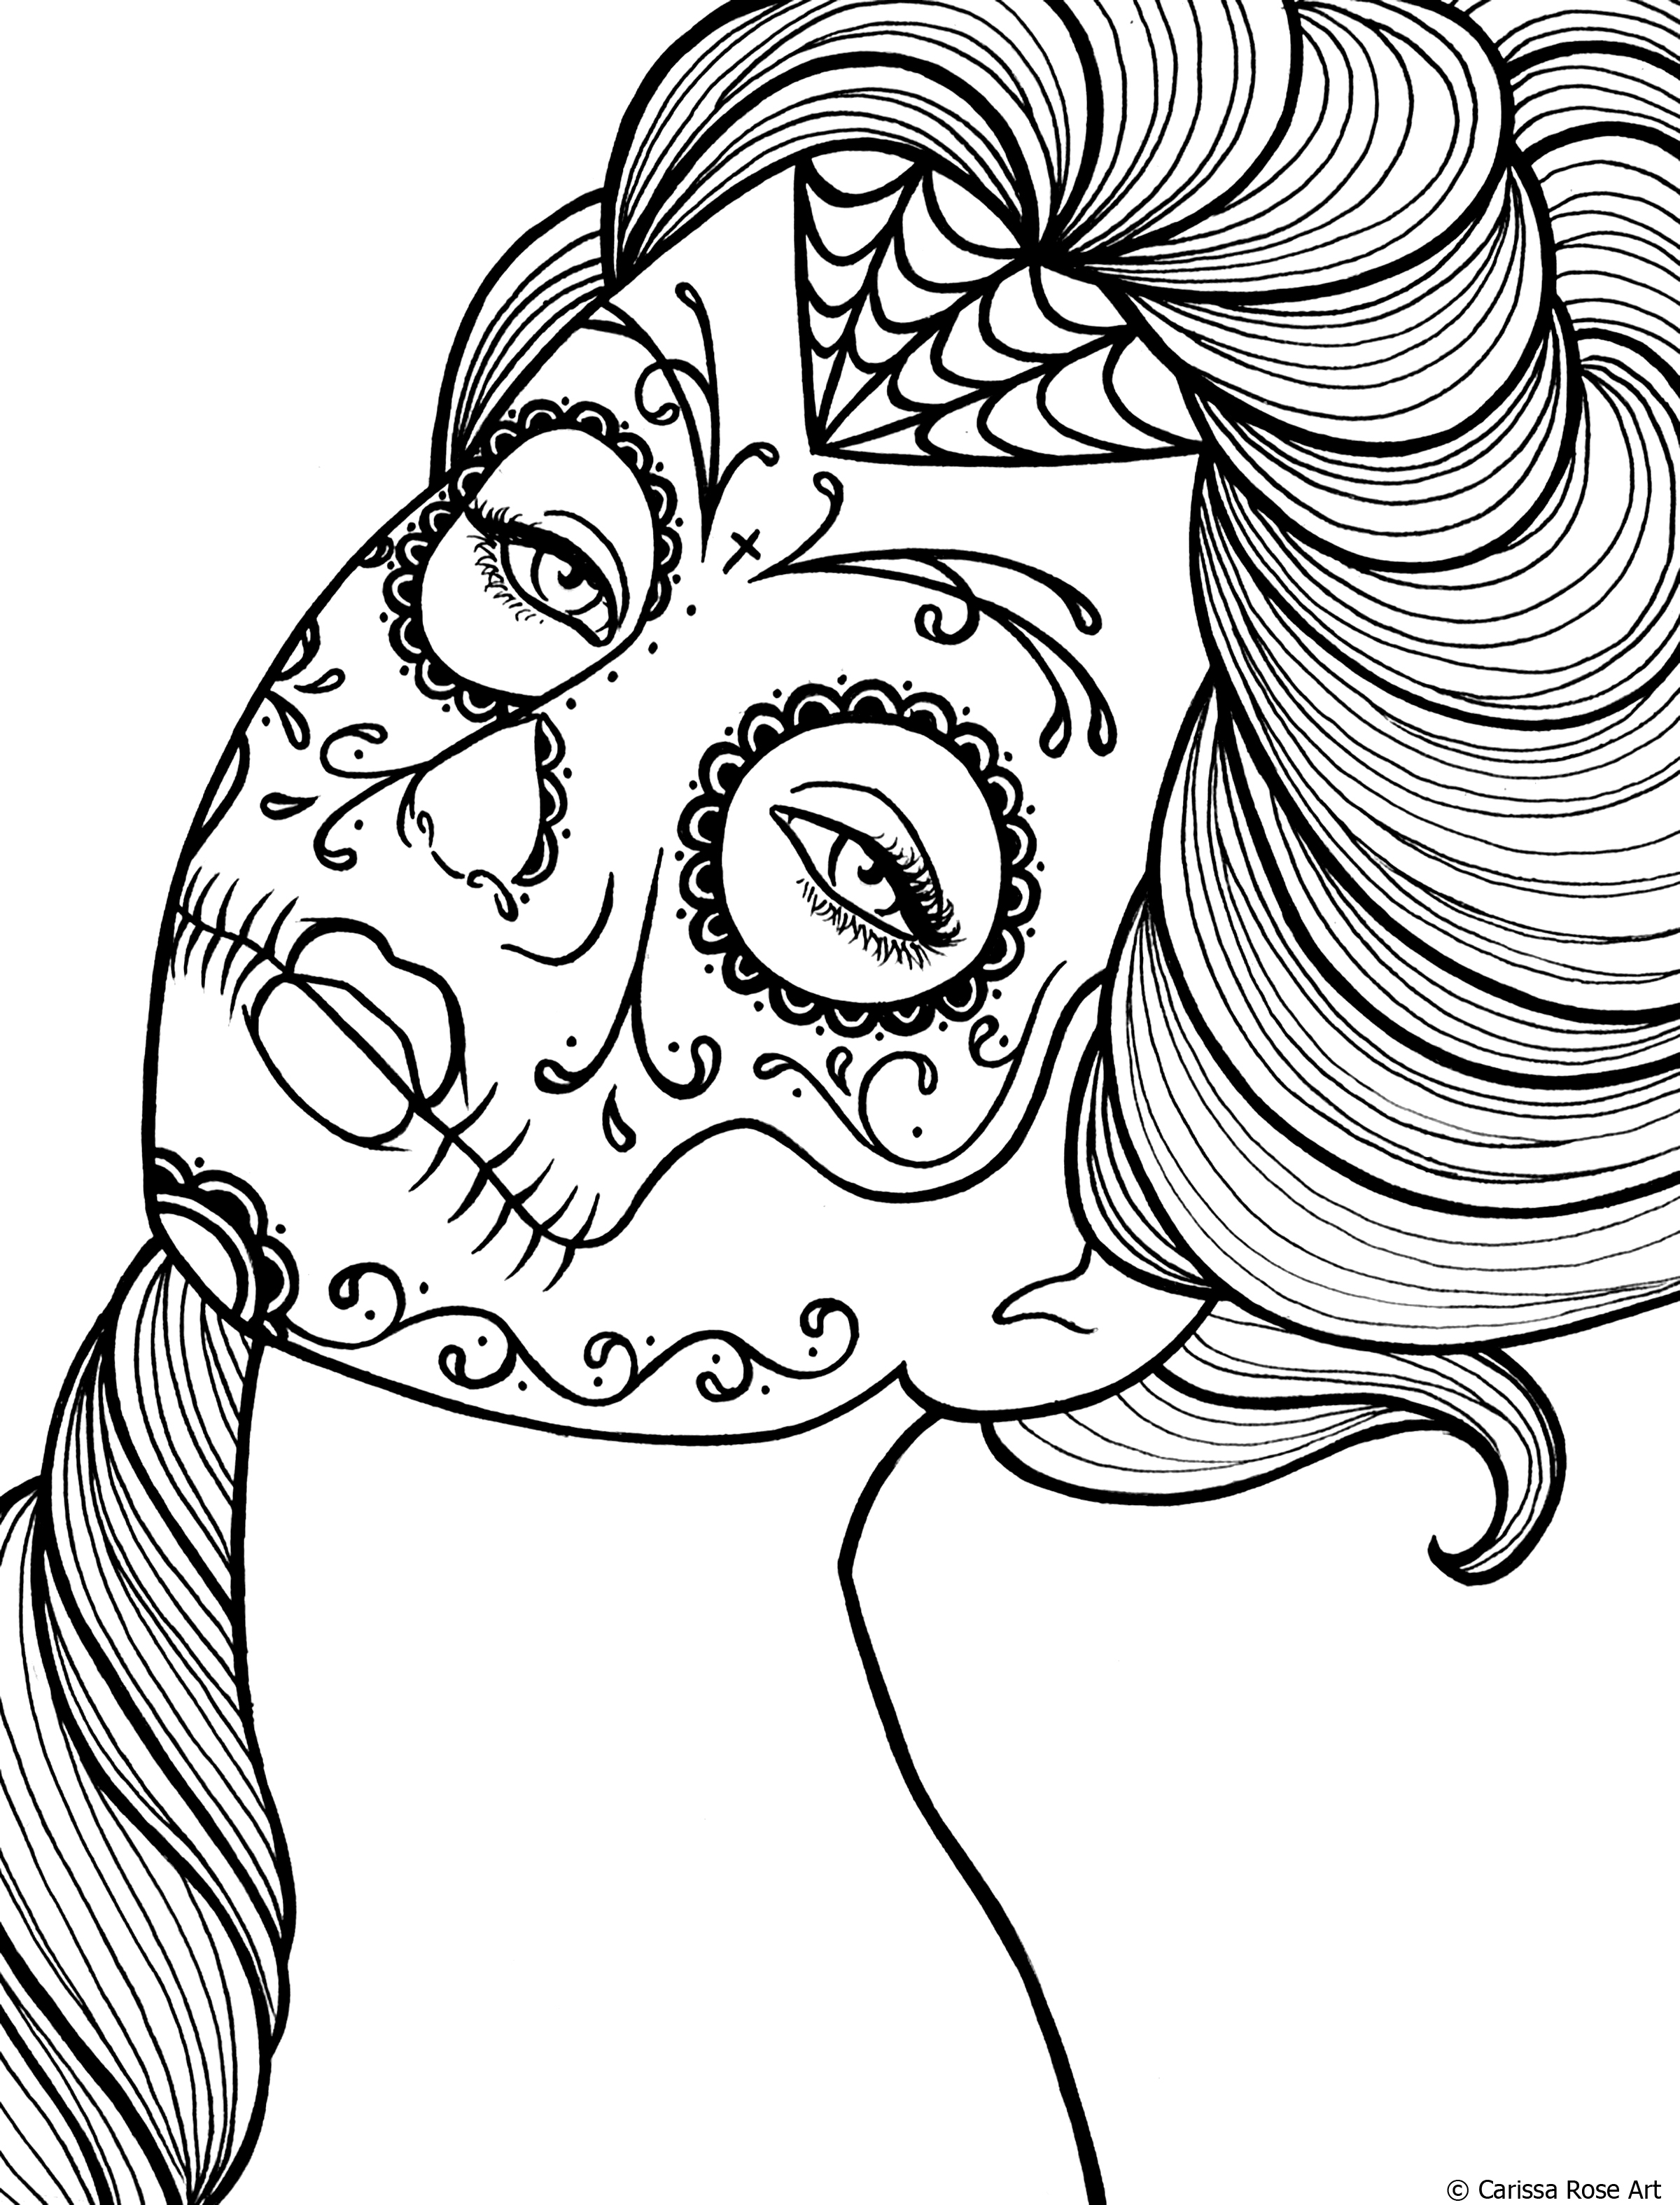 free-printable-day-of-the-dead-coloring-book-page-by-misscarissarose-on